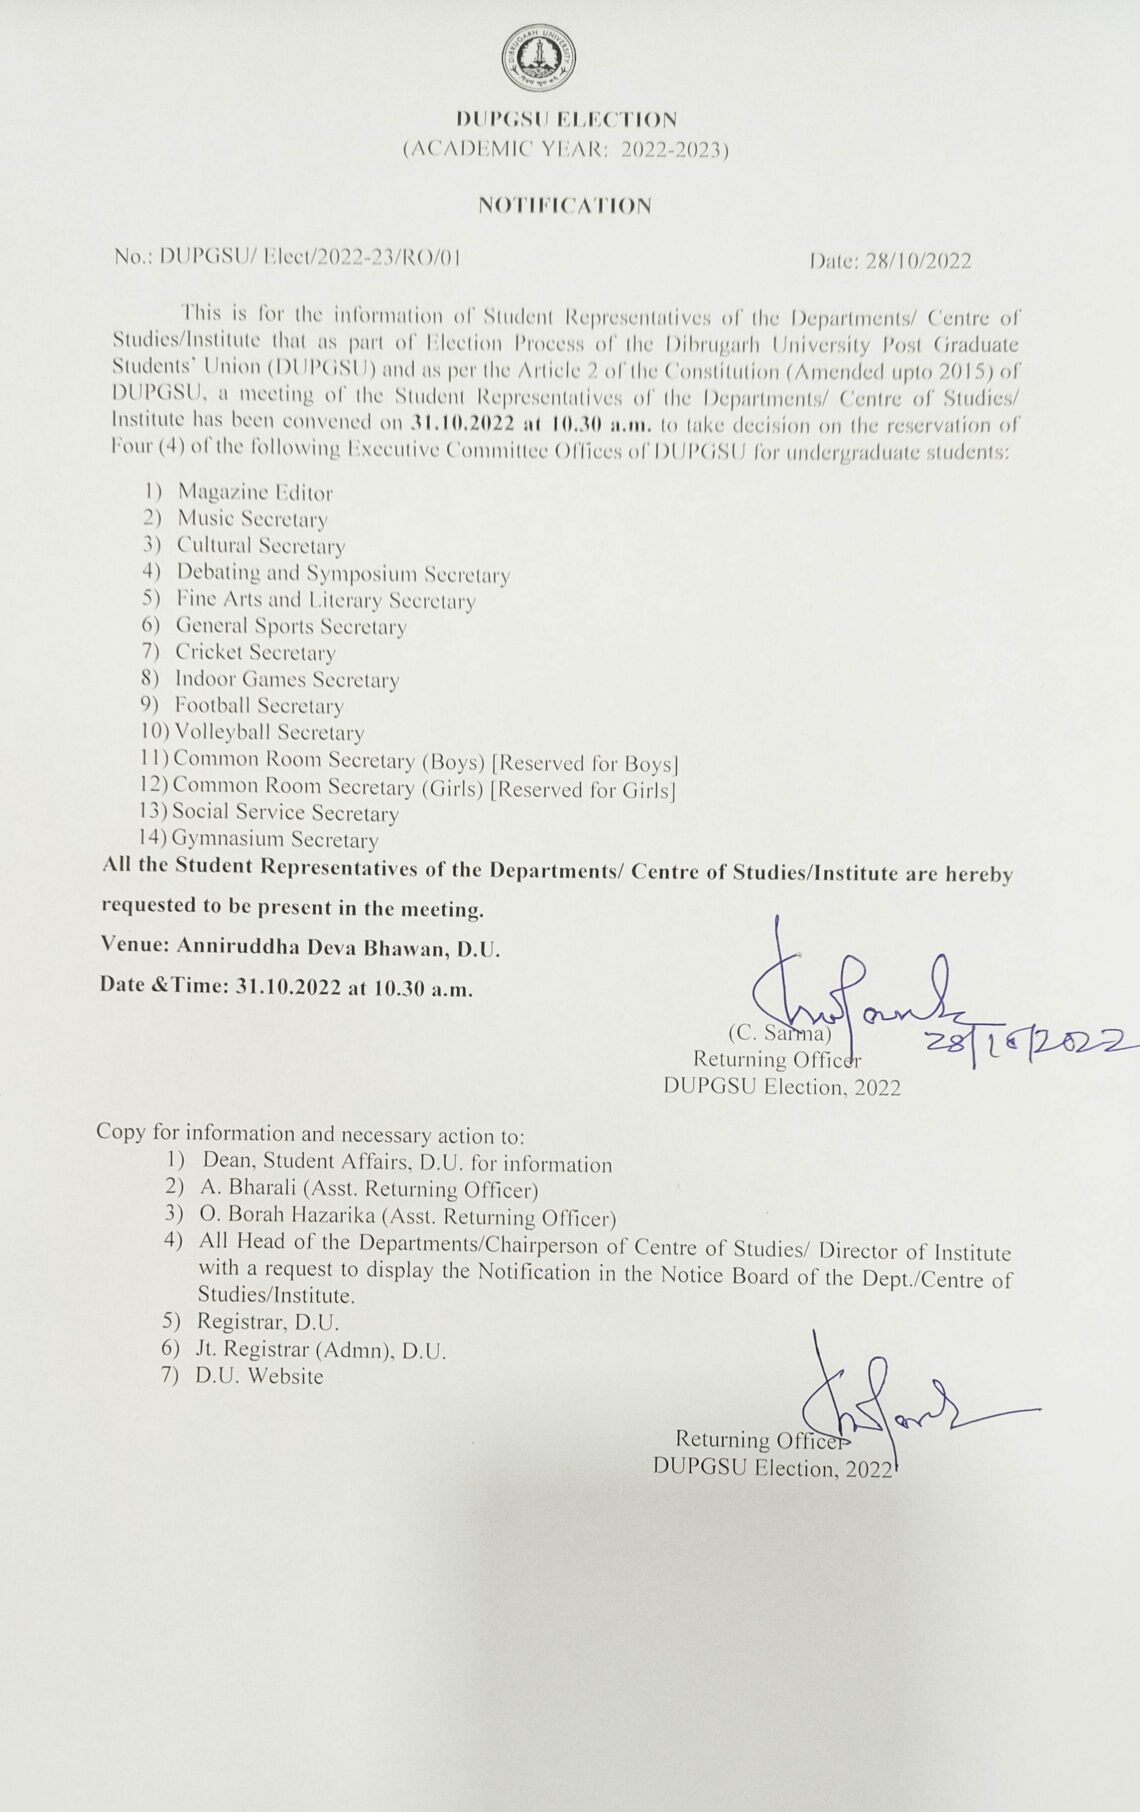 Notification regarding the meeting of the Student Representatives of